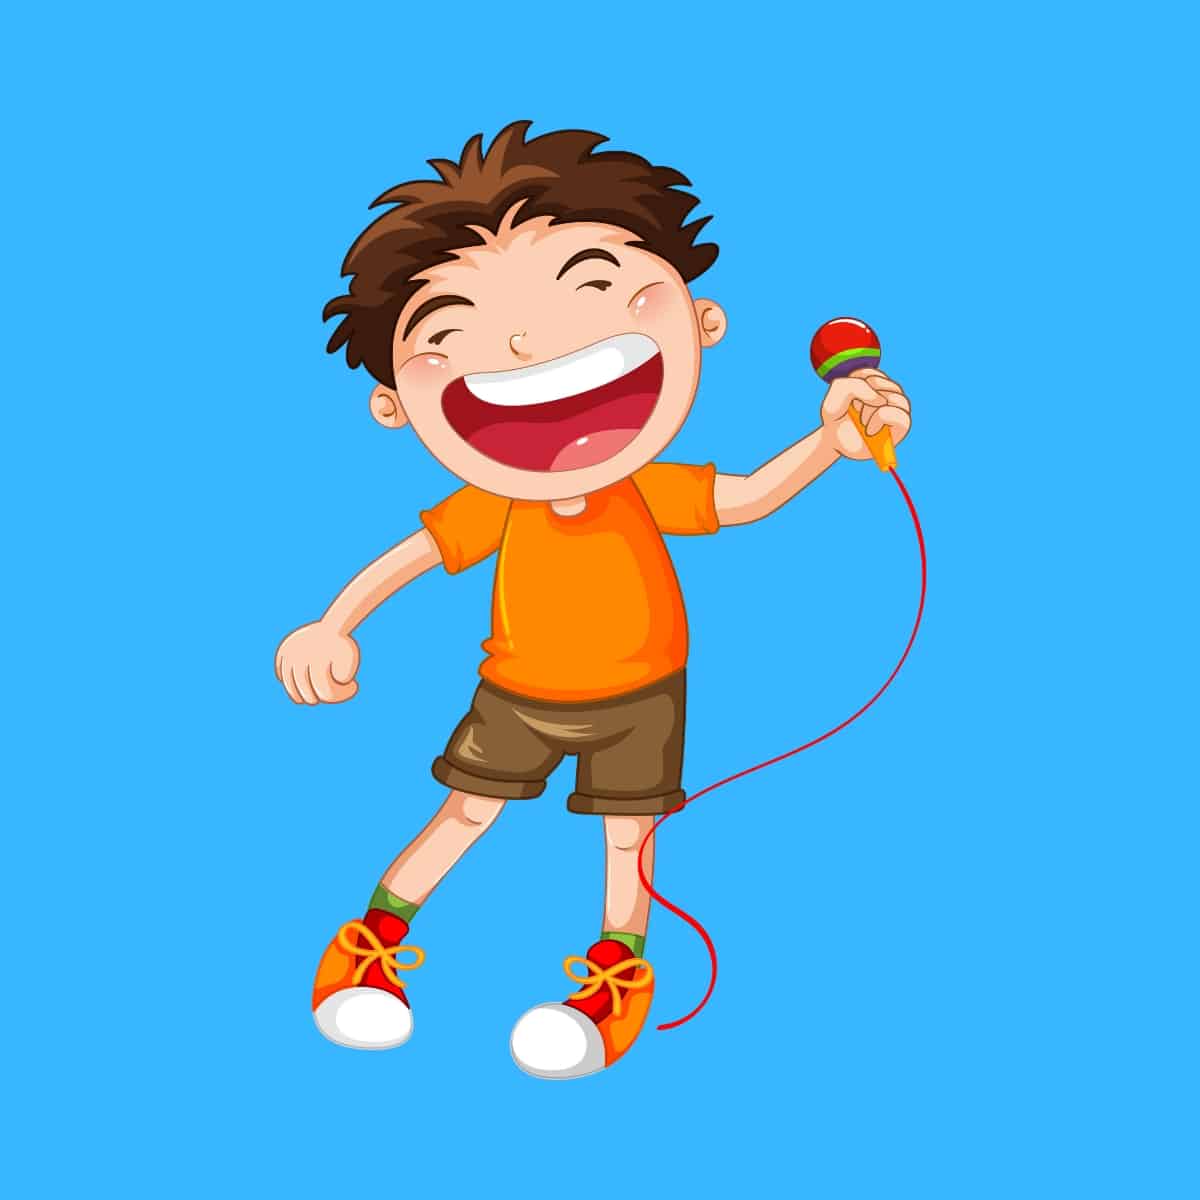 Cartoon graphic of a young boy singing while holding a microphone on a blue background.